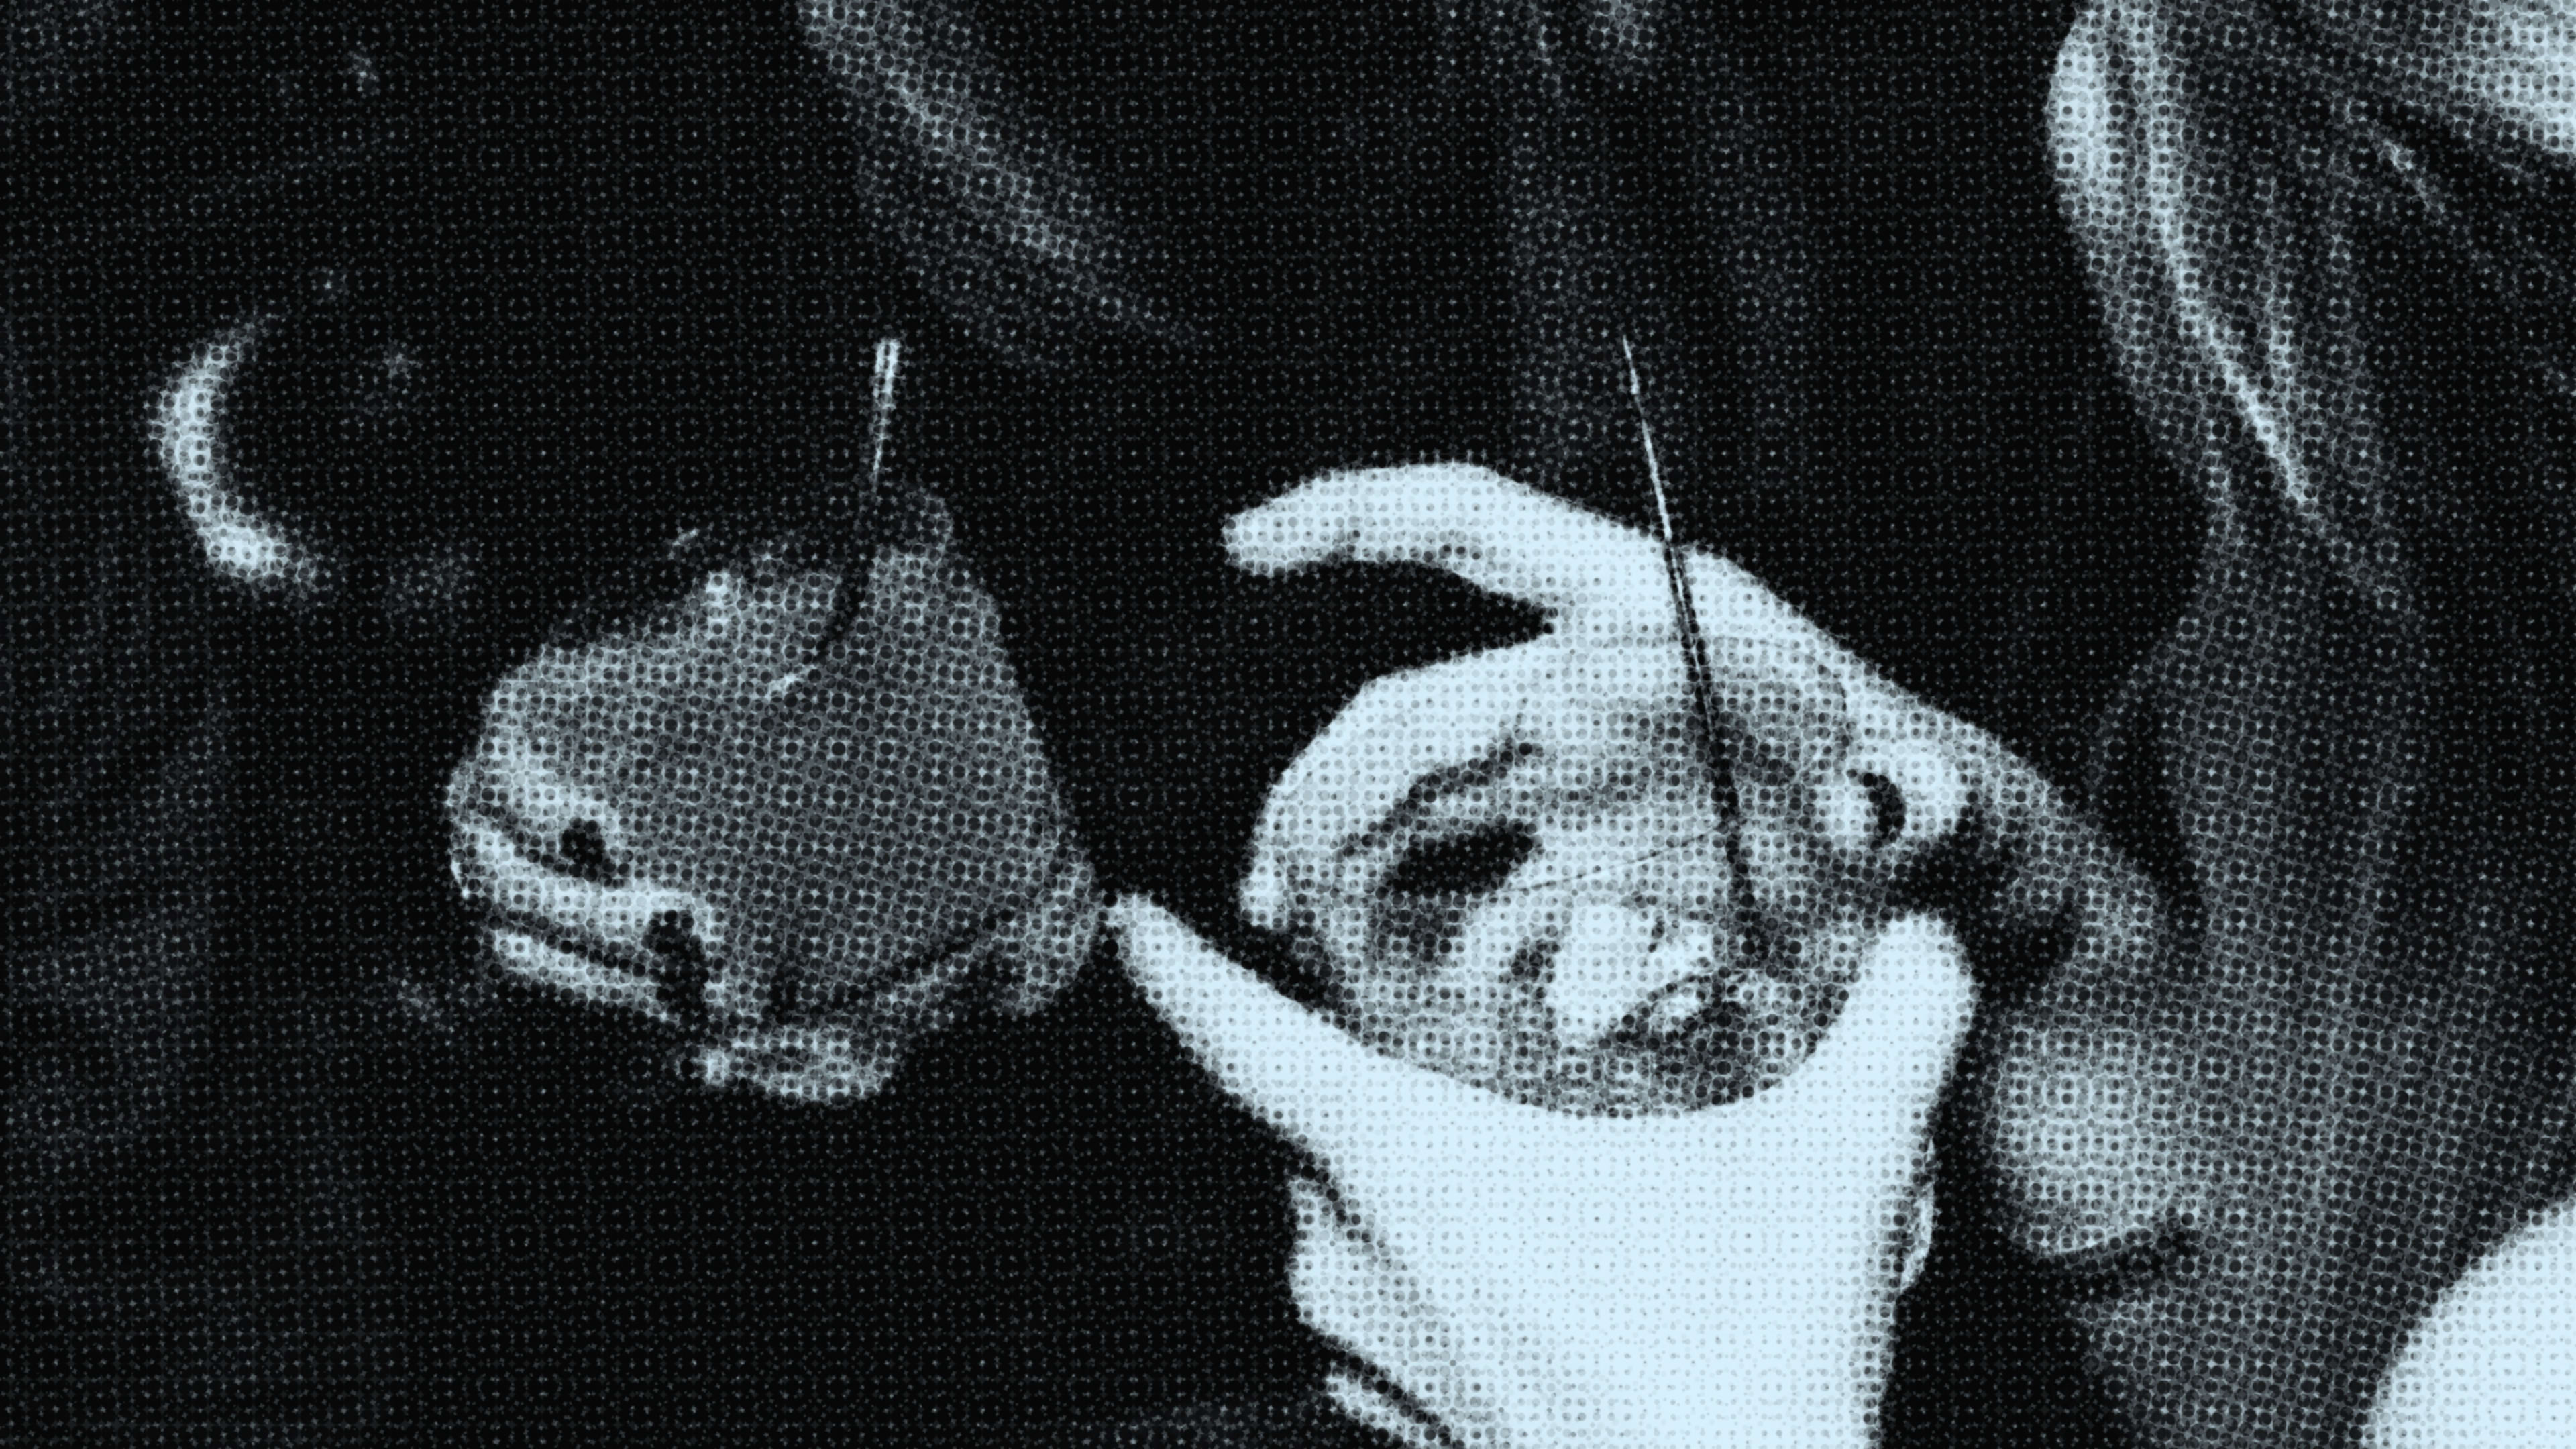 Yale neuroscientists have identified 29 reasons why you drink too much